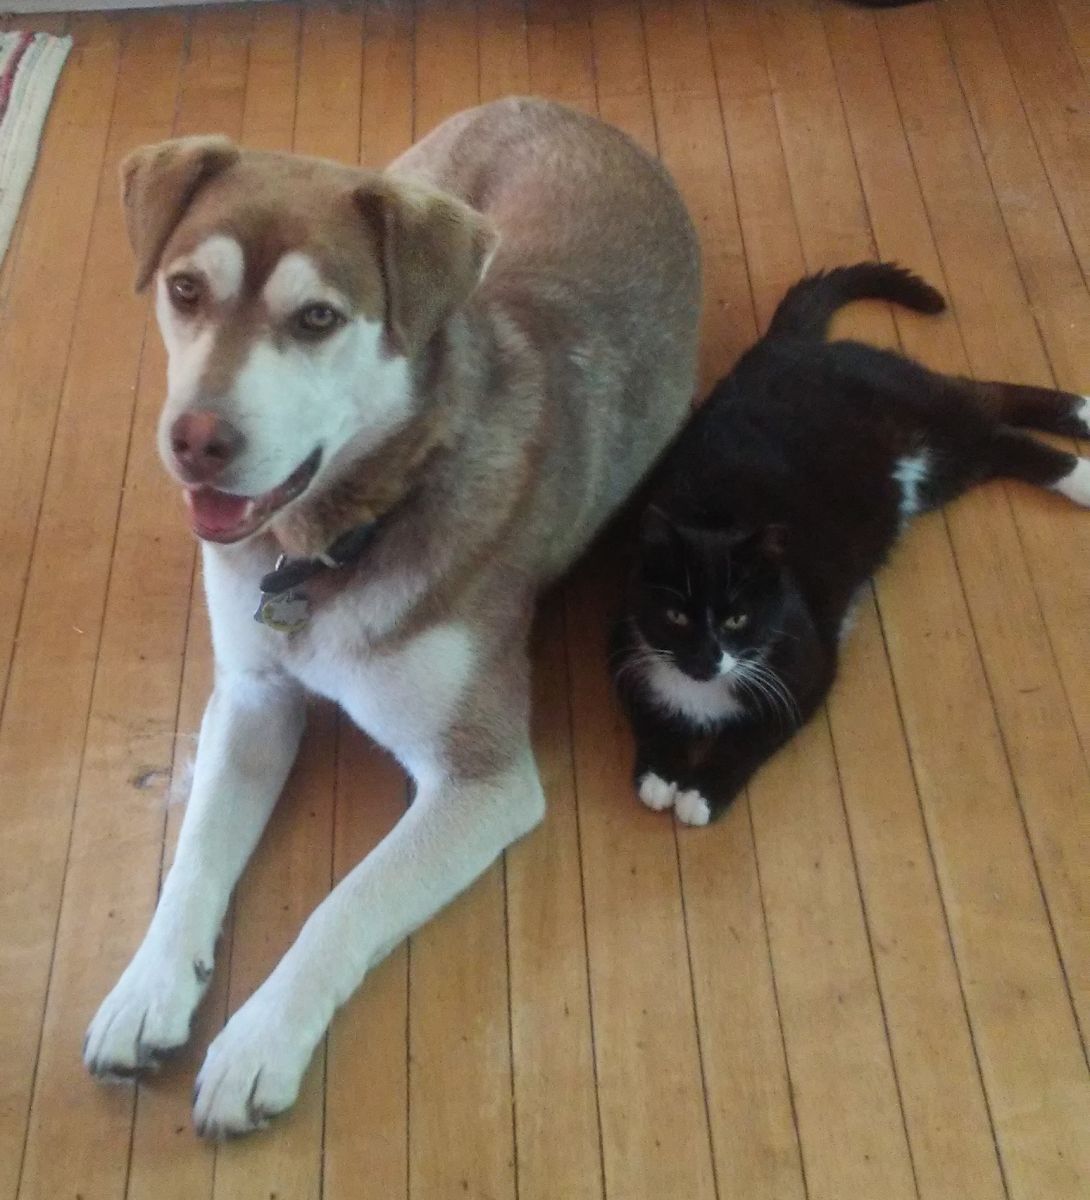 Timber the dog and Arthur the cat